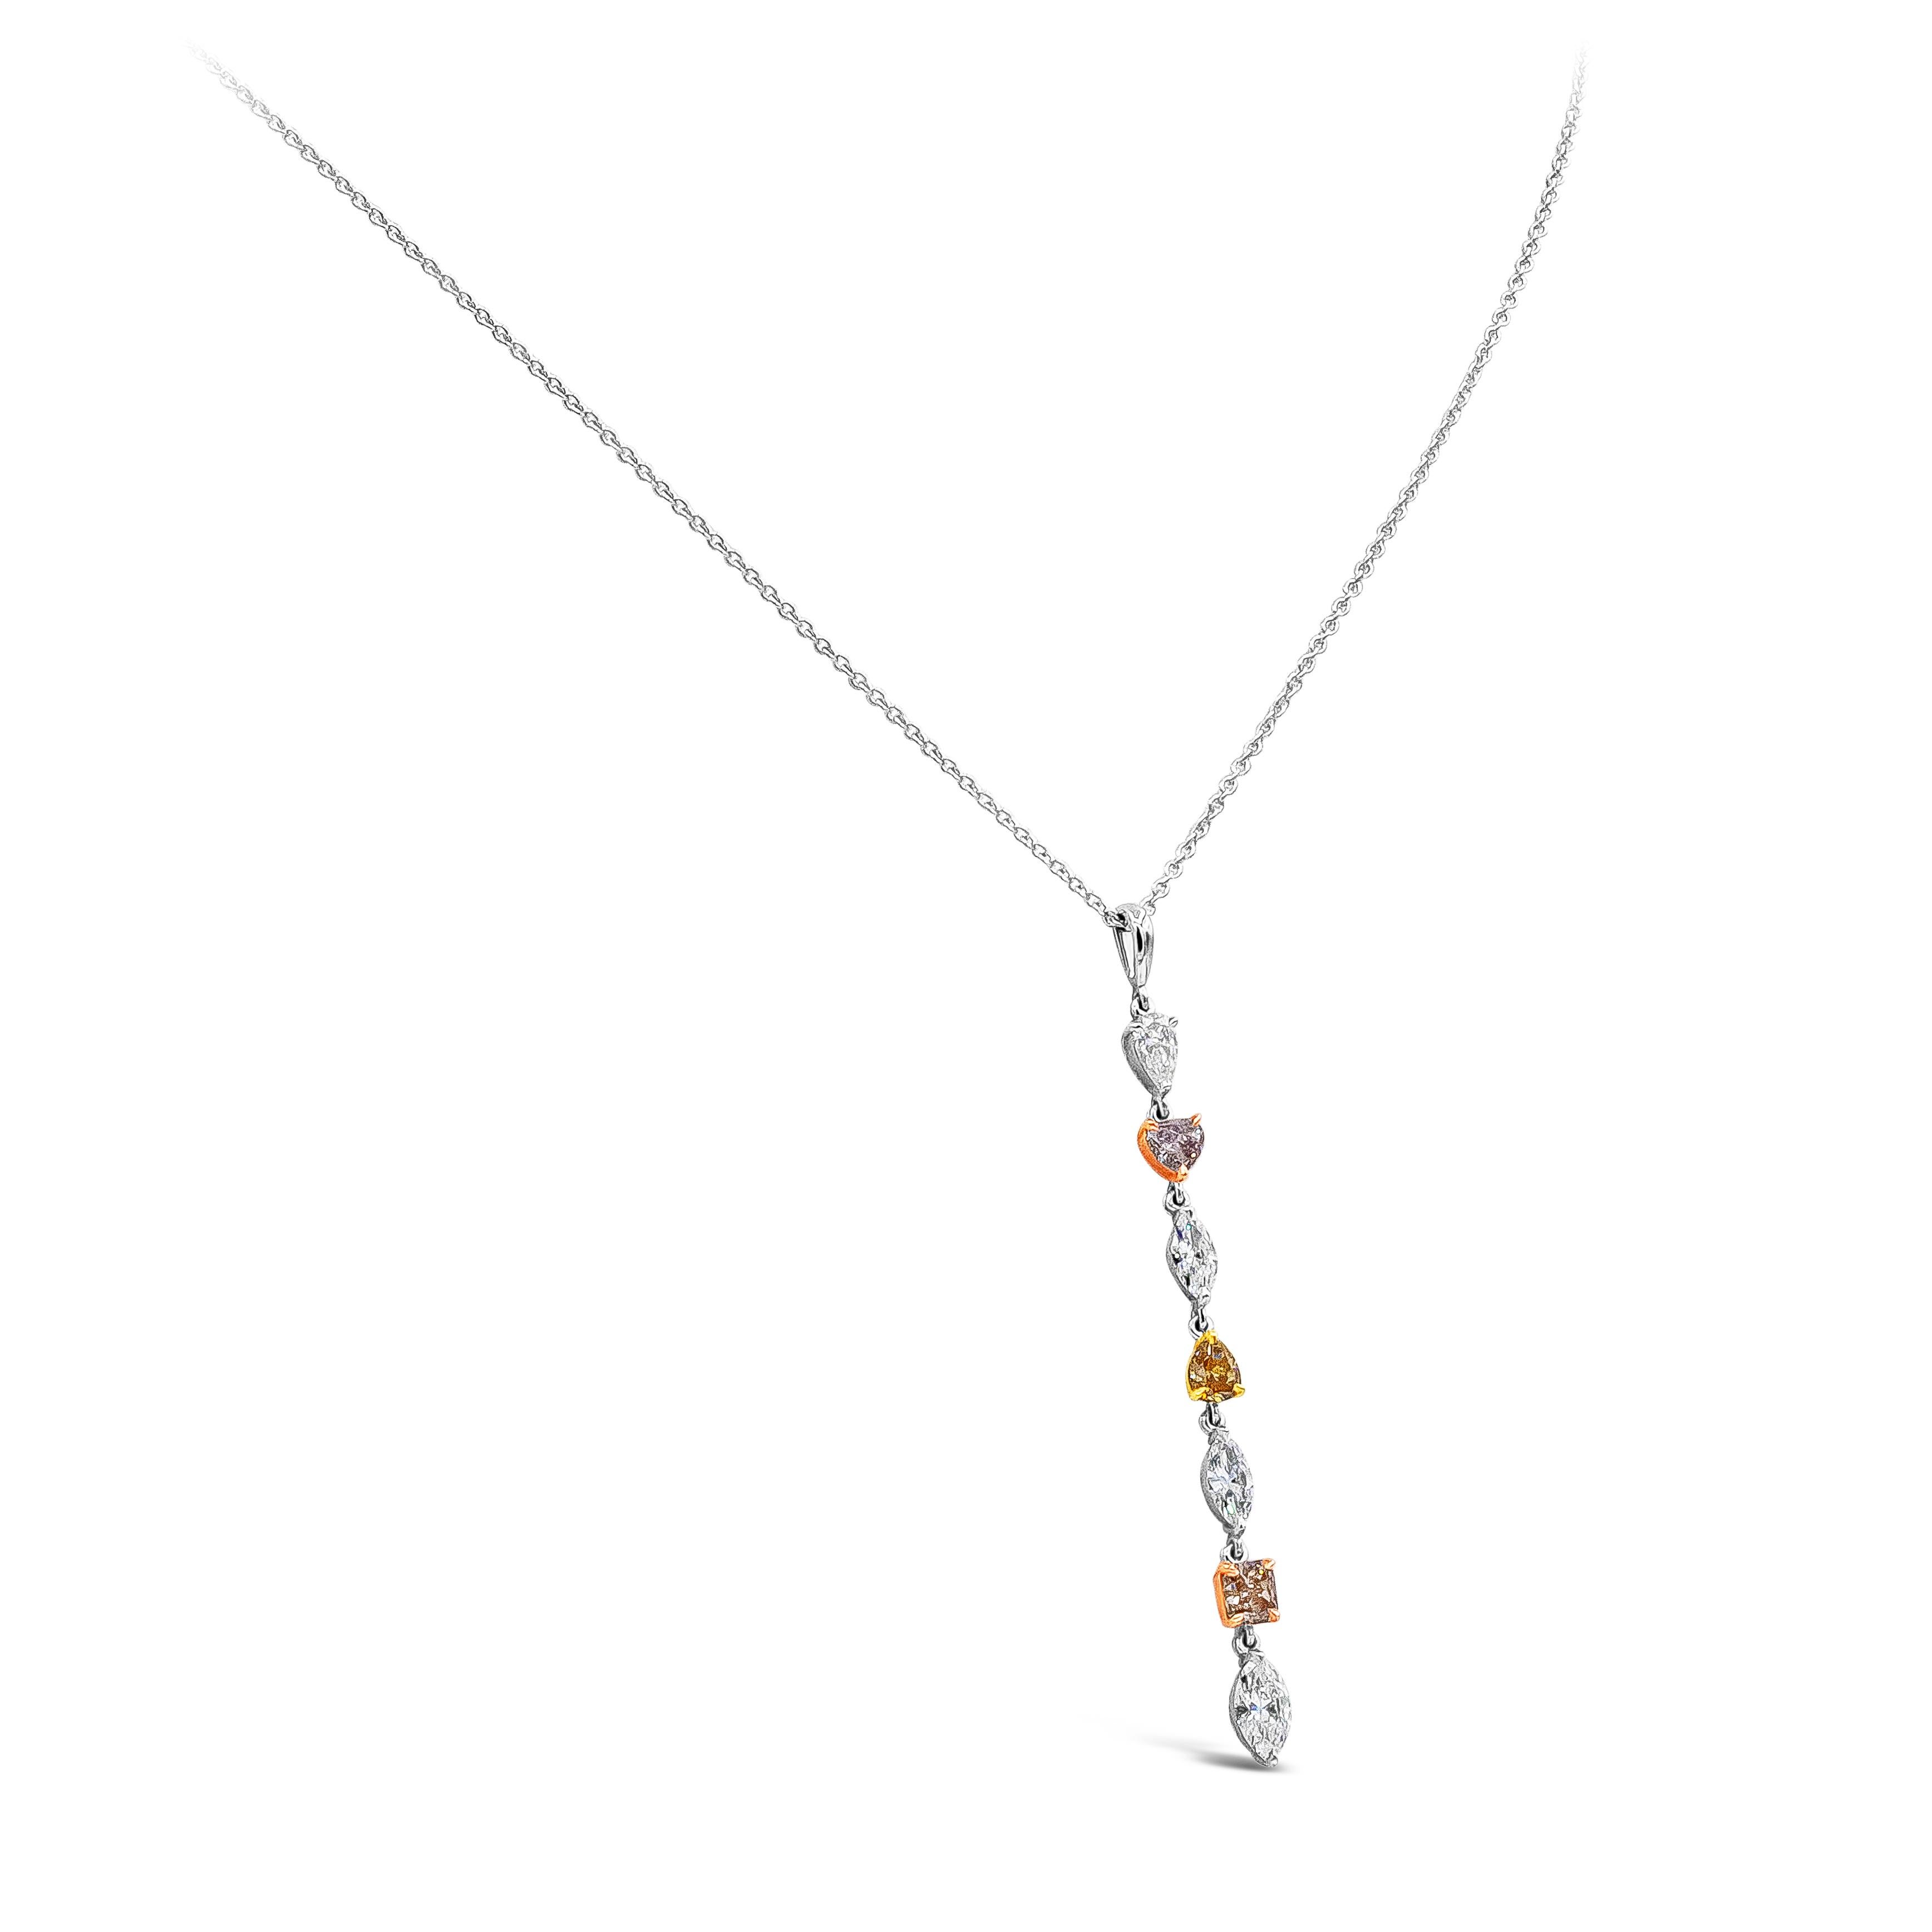 This is an incredibly gorgeous and colorful drop pendant necklace showcasing three GIA certified fancy shaped diamonds set in an elegant drop design weighing 0.96 carats total. Spaced by marquise and pear shape white diamonds weighing 1.04 carats